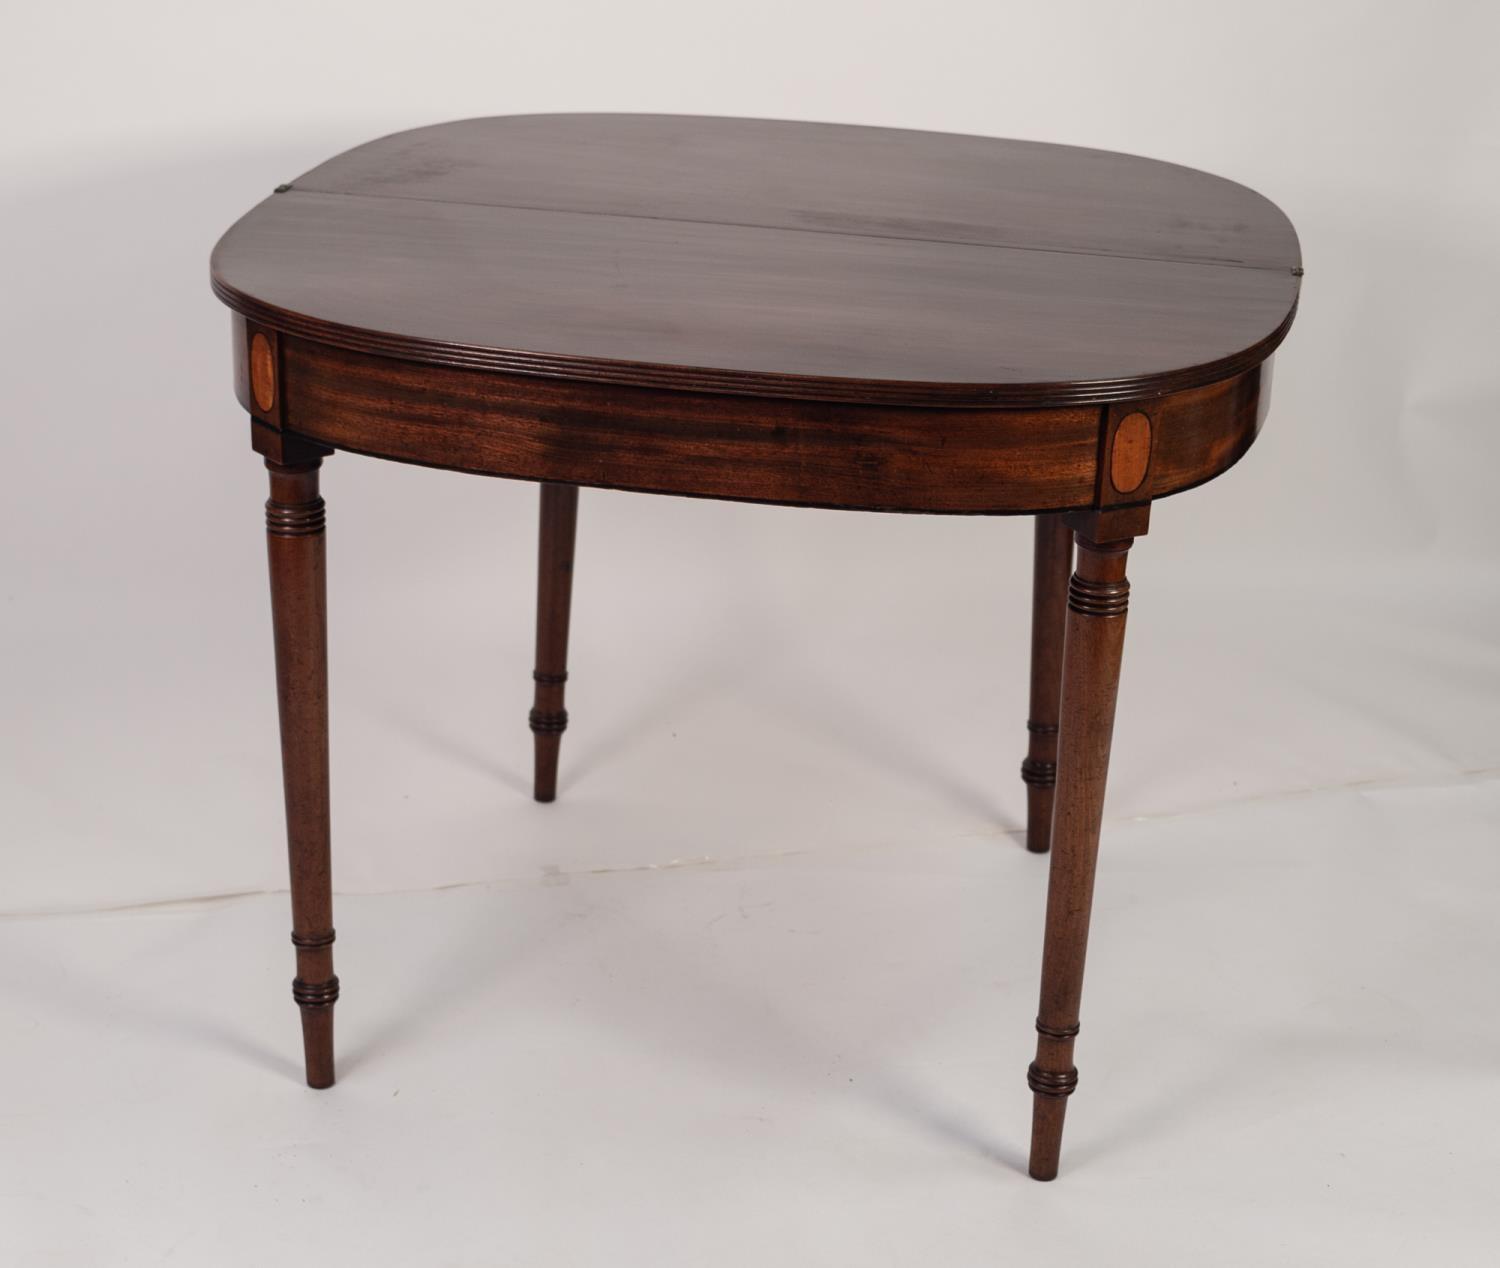 EARLY NINETEENTH CENTURY MAHOGANY FOLD-OVER TEA TABLE, the ?D? shaped top with reeded border, - Image 2 of 2